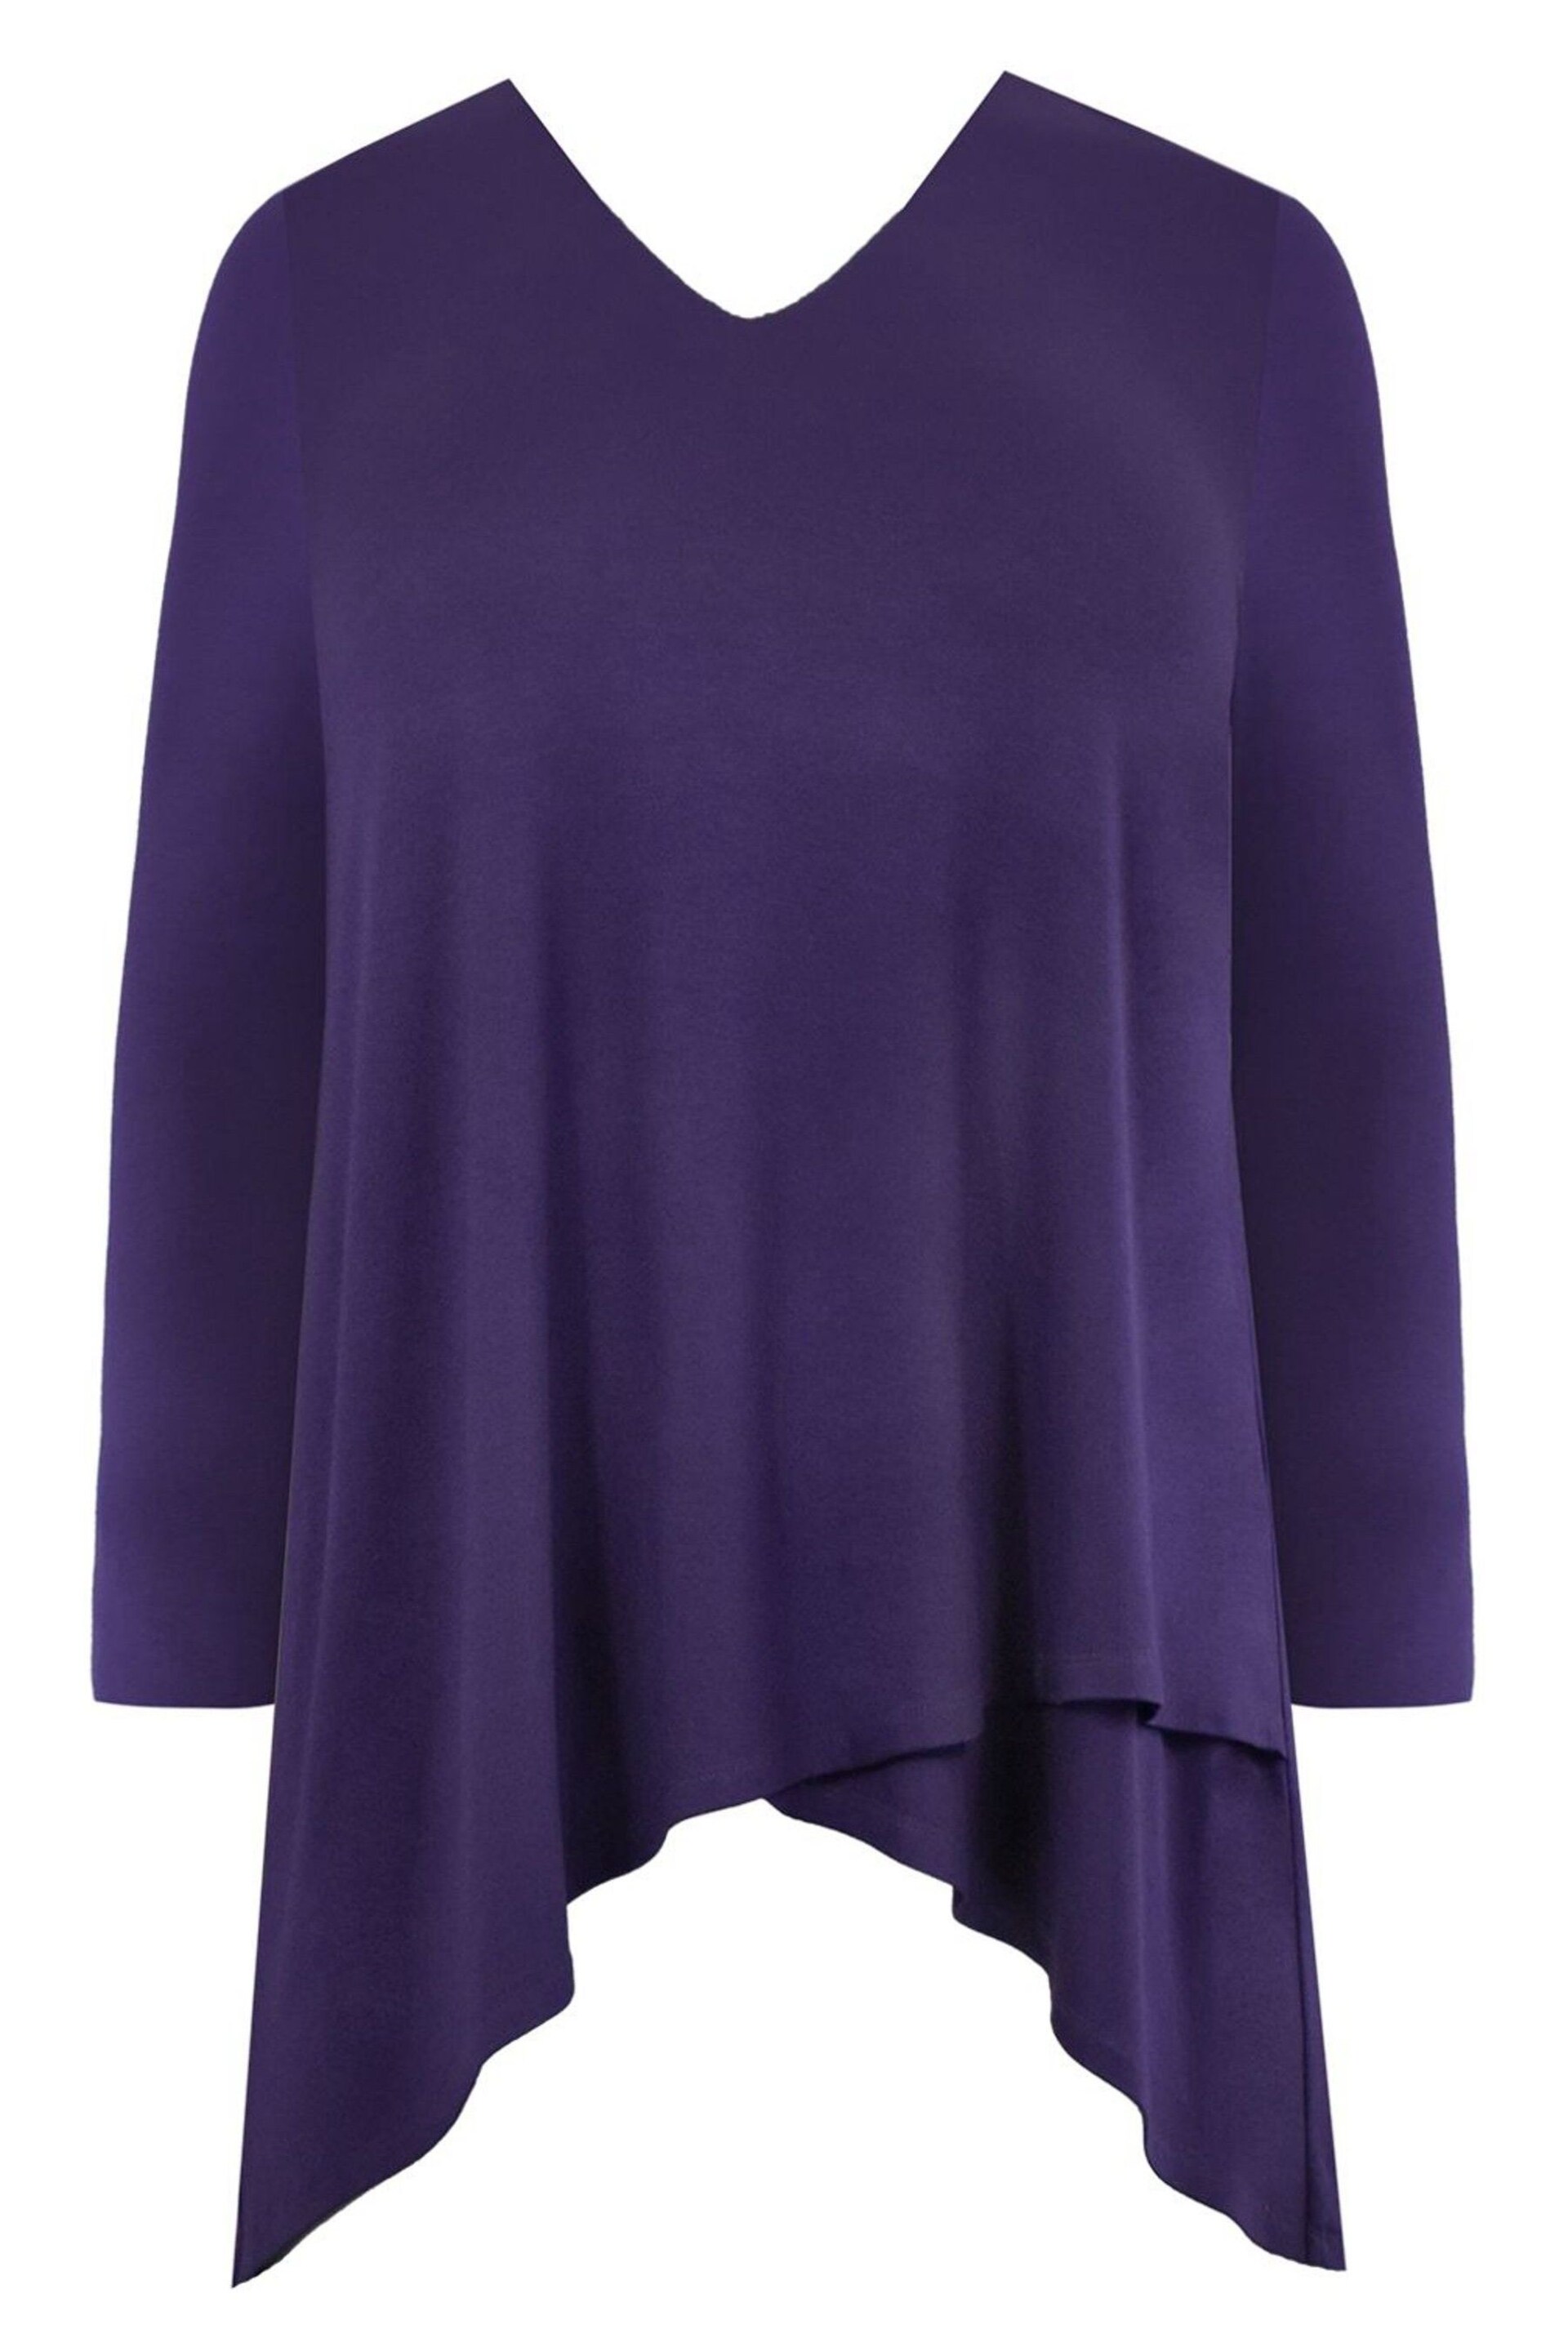 Live Unlimited Jersey High Low Tunic - Image 4 of 4